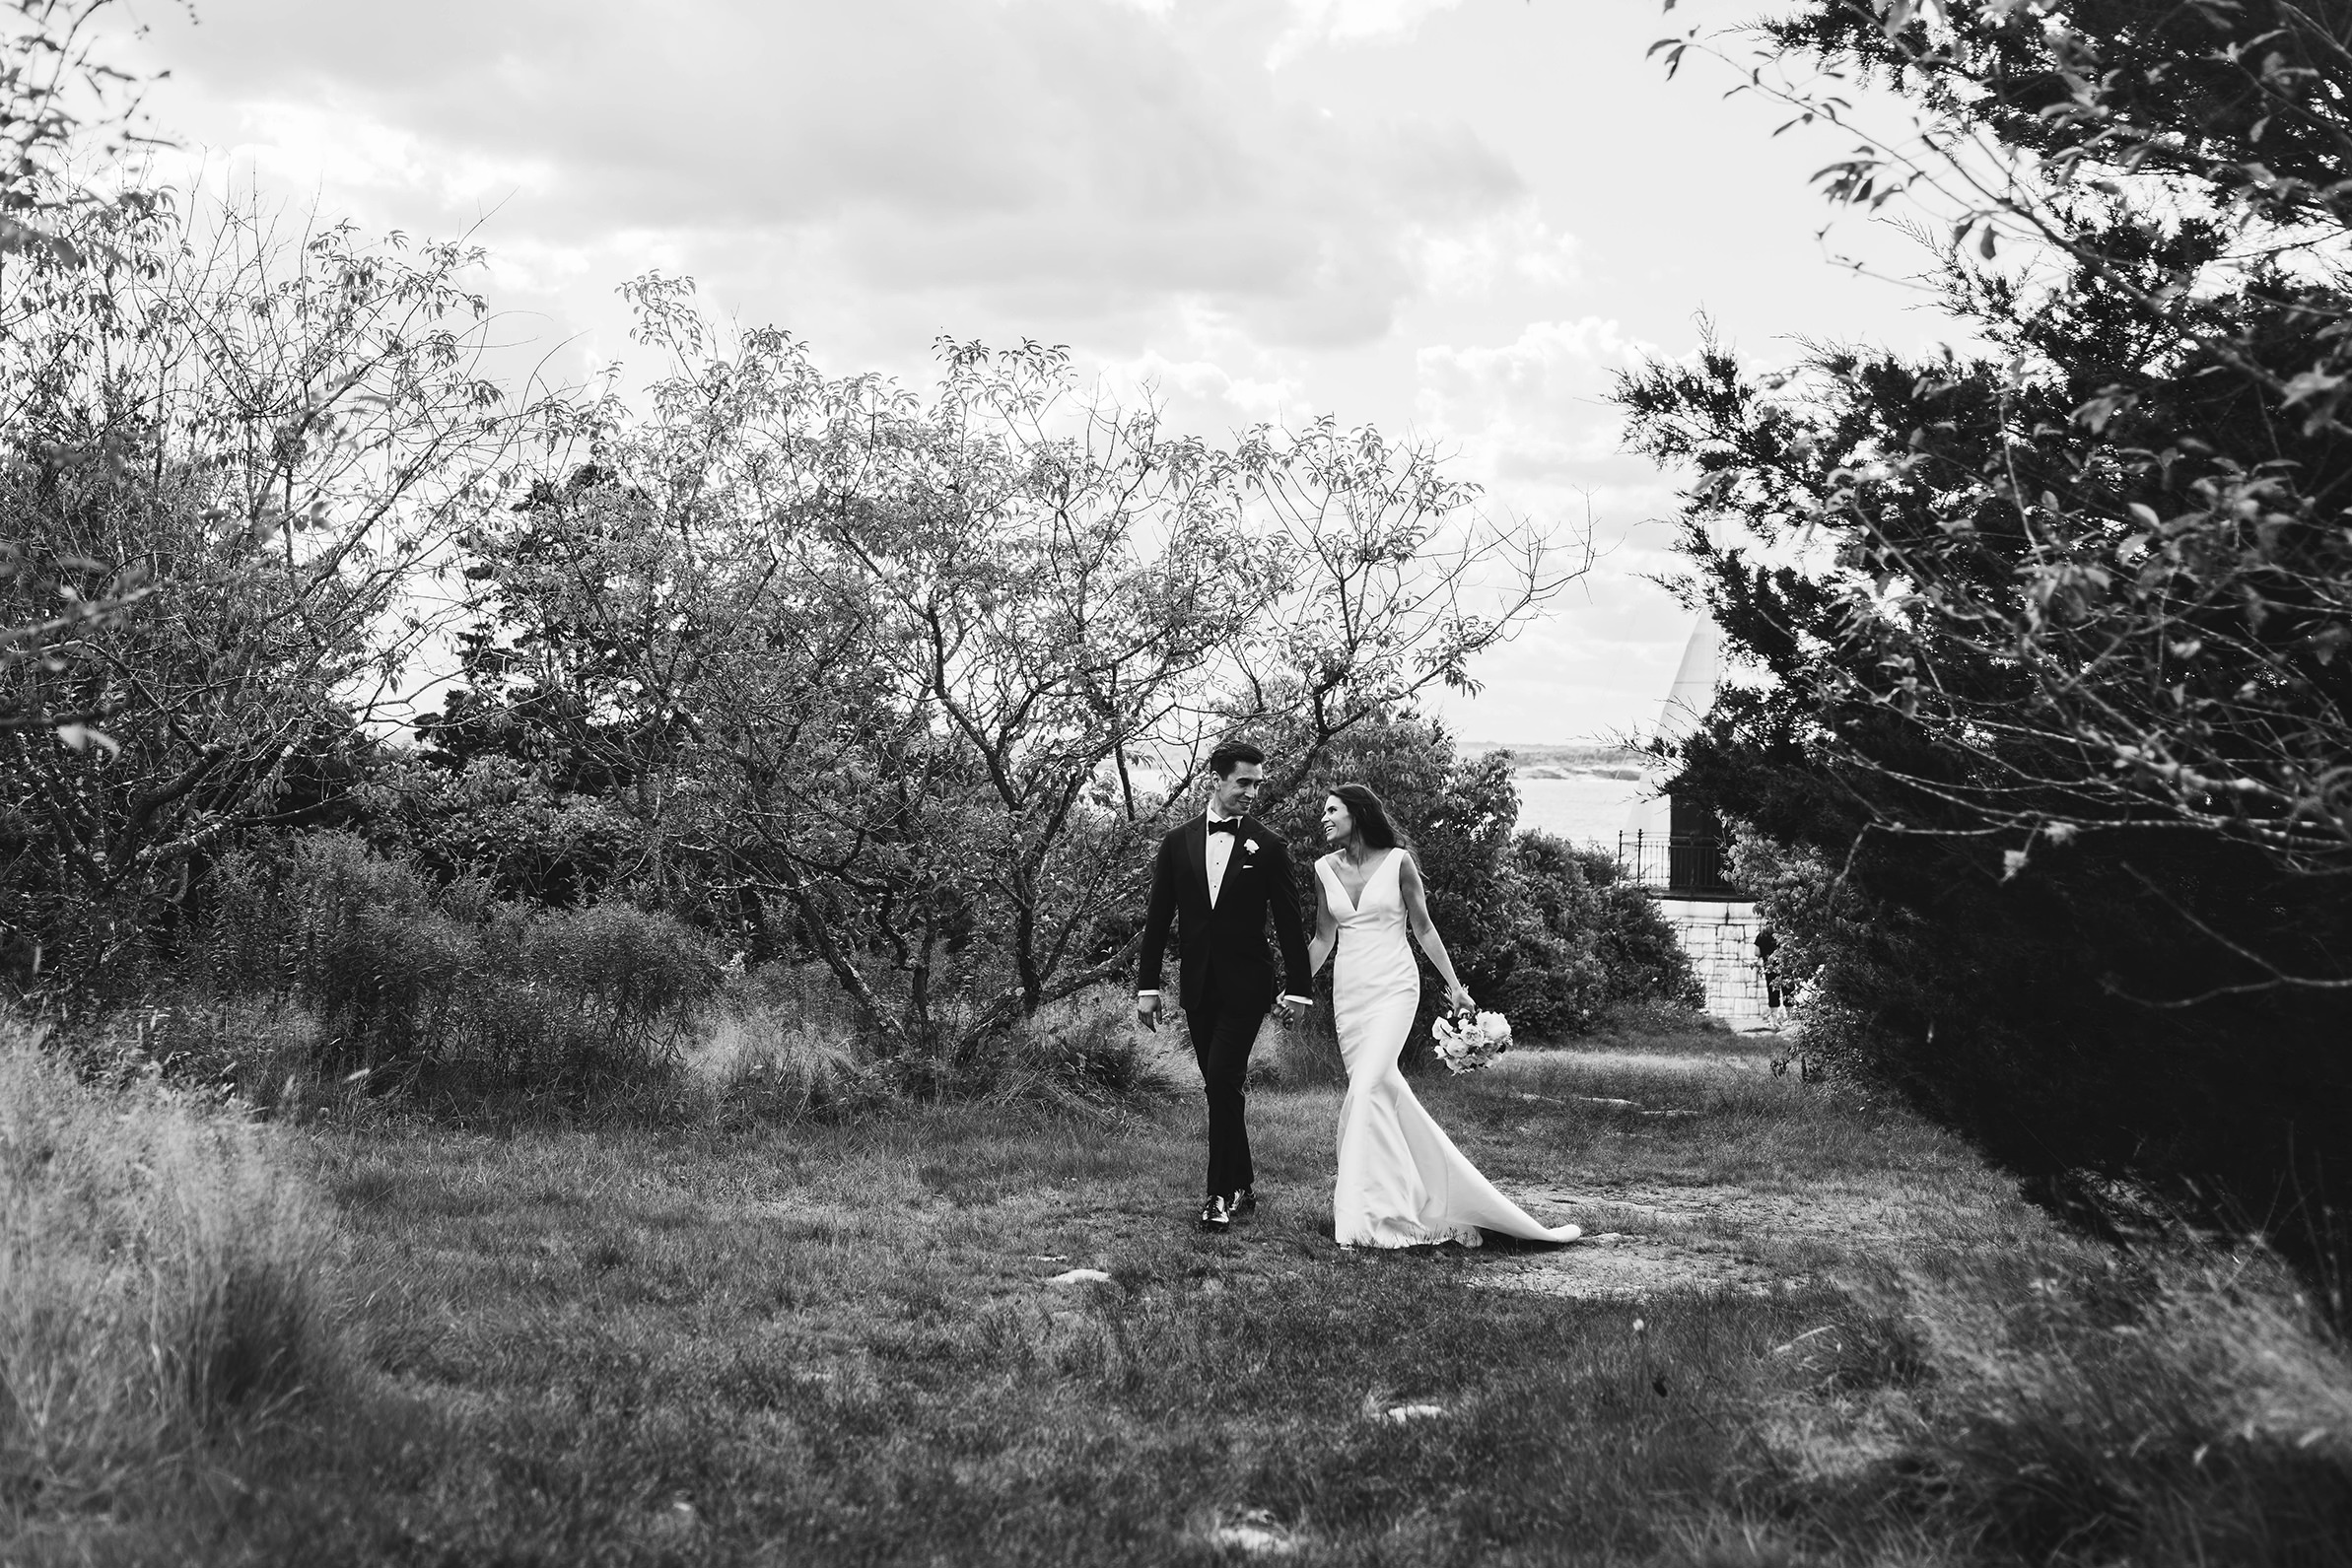 A documentary photograph featured in the best of wedding photography of 2019 showing a couple walking together during their castle hill inn wedding